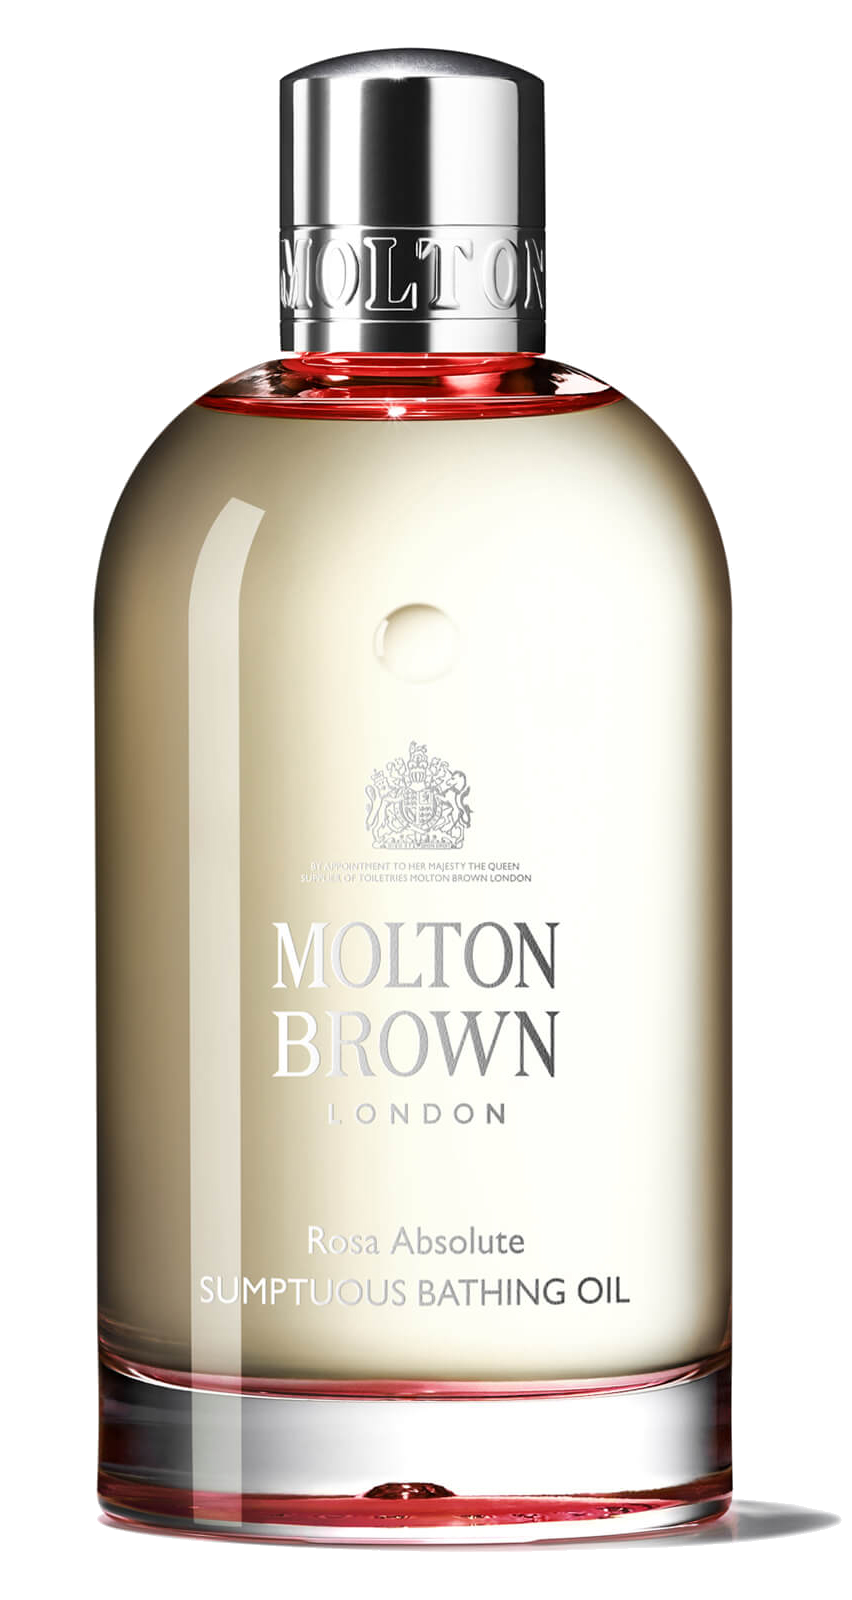 Molton Brown – Rosa Absolute Sumptuous Bathing Oil